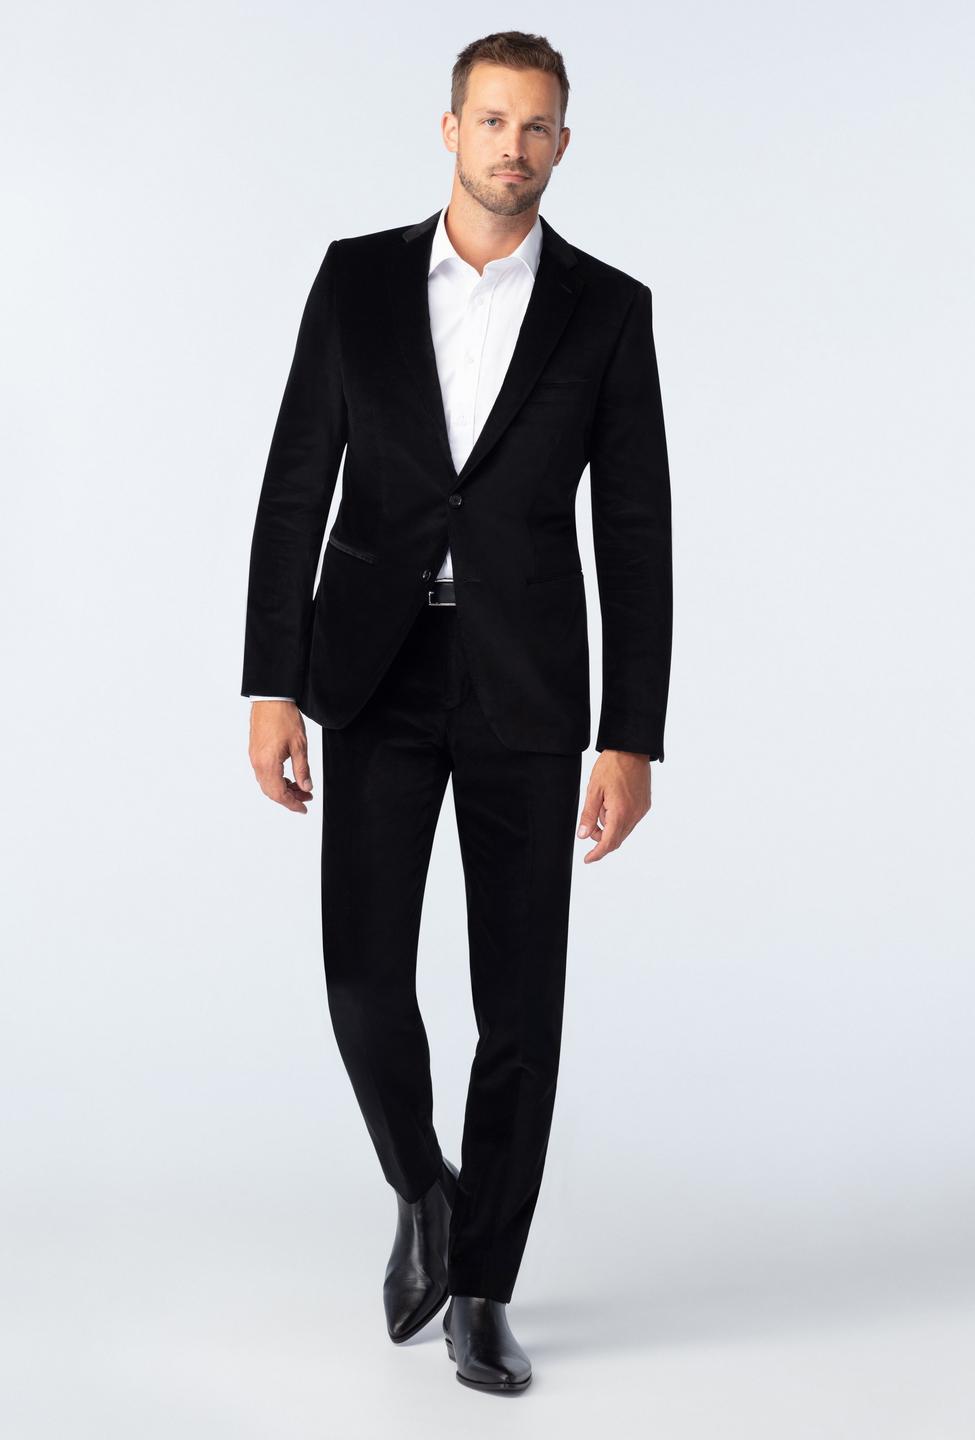 Black suit - Harford Solid Design from Premium Indochino Collection